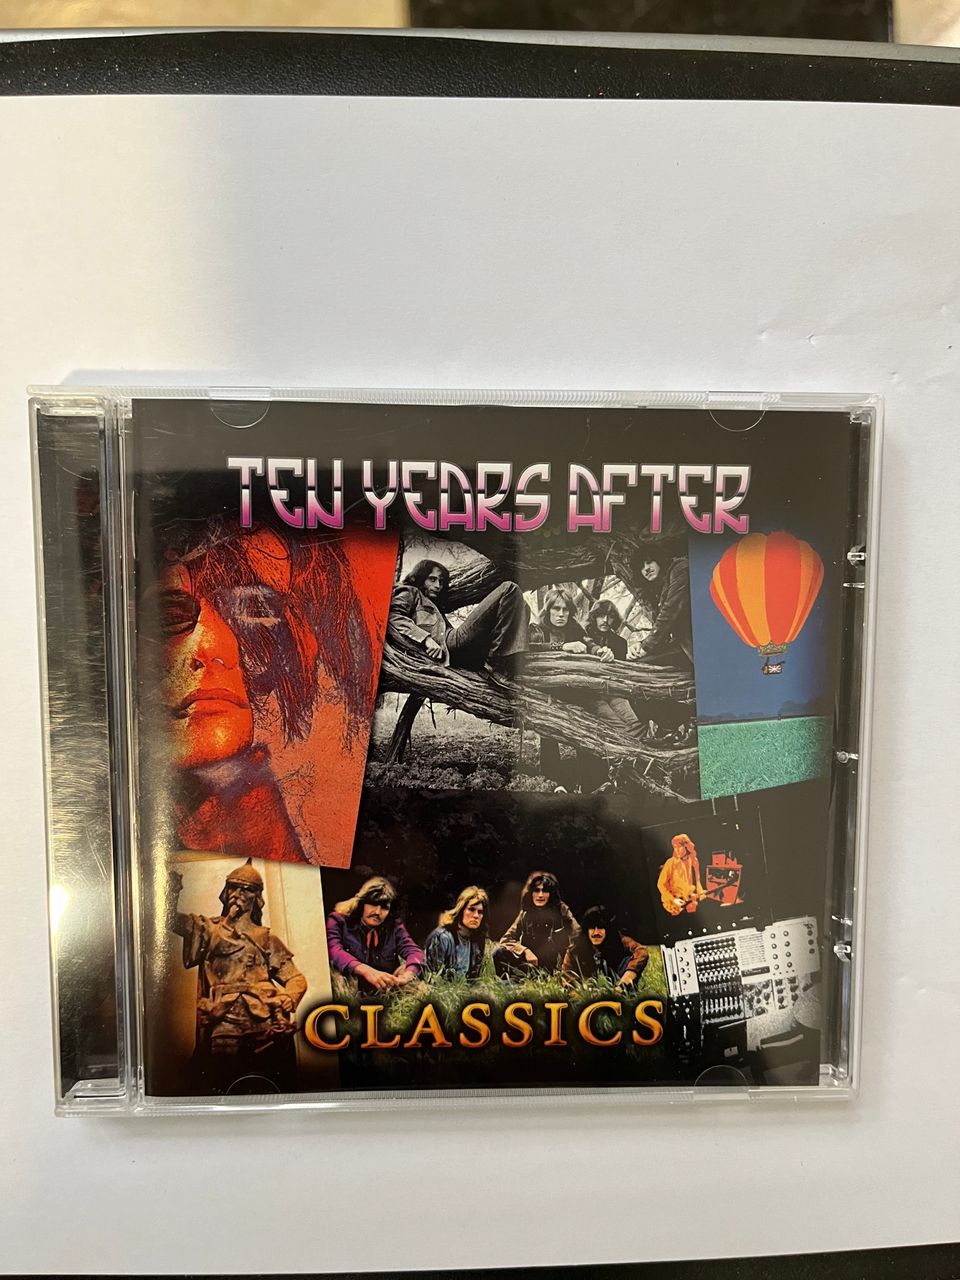 TEN YEARS AFTER(Classics)